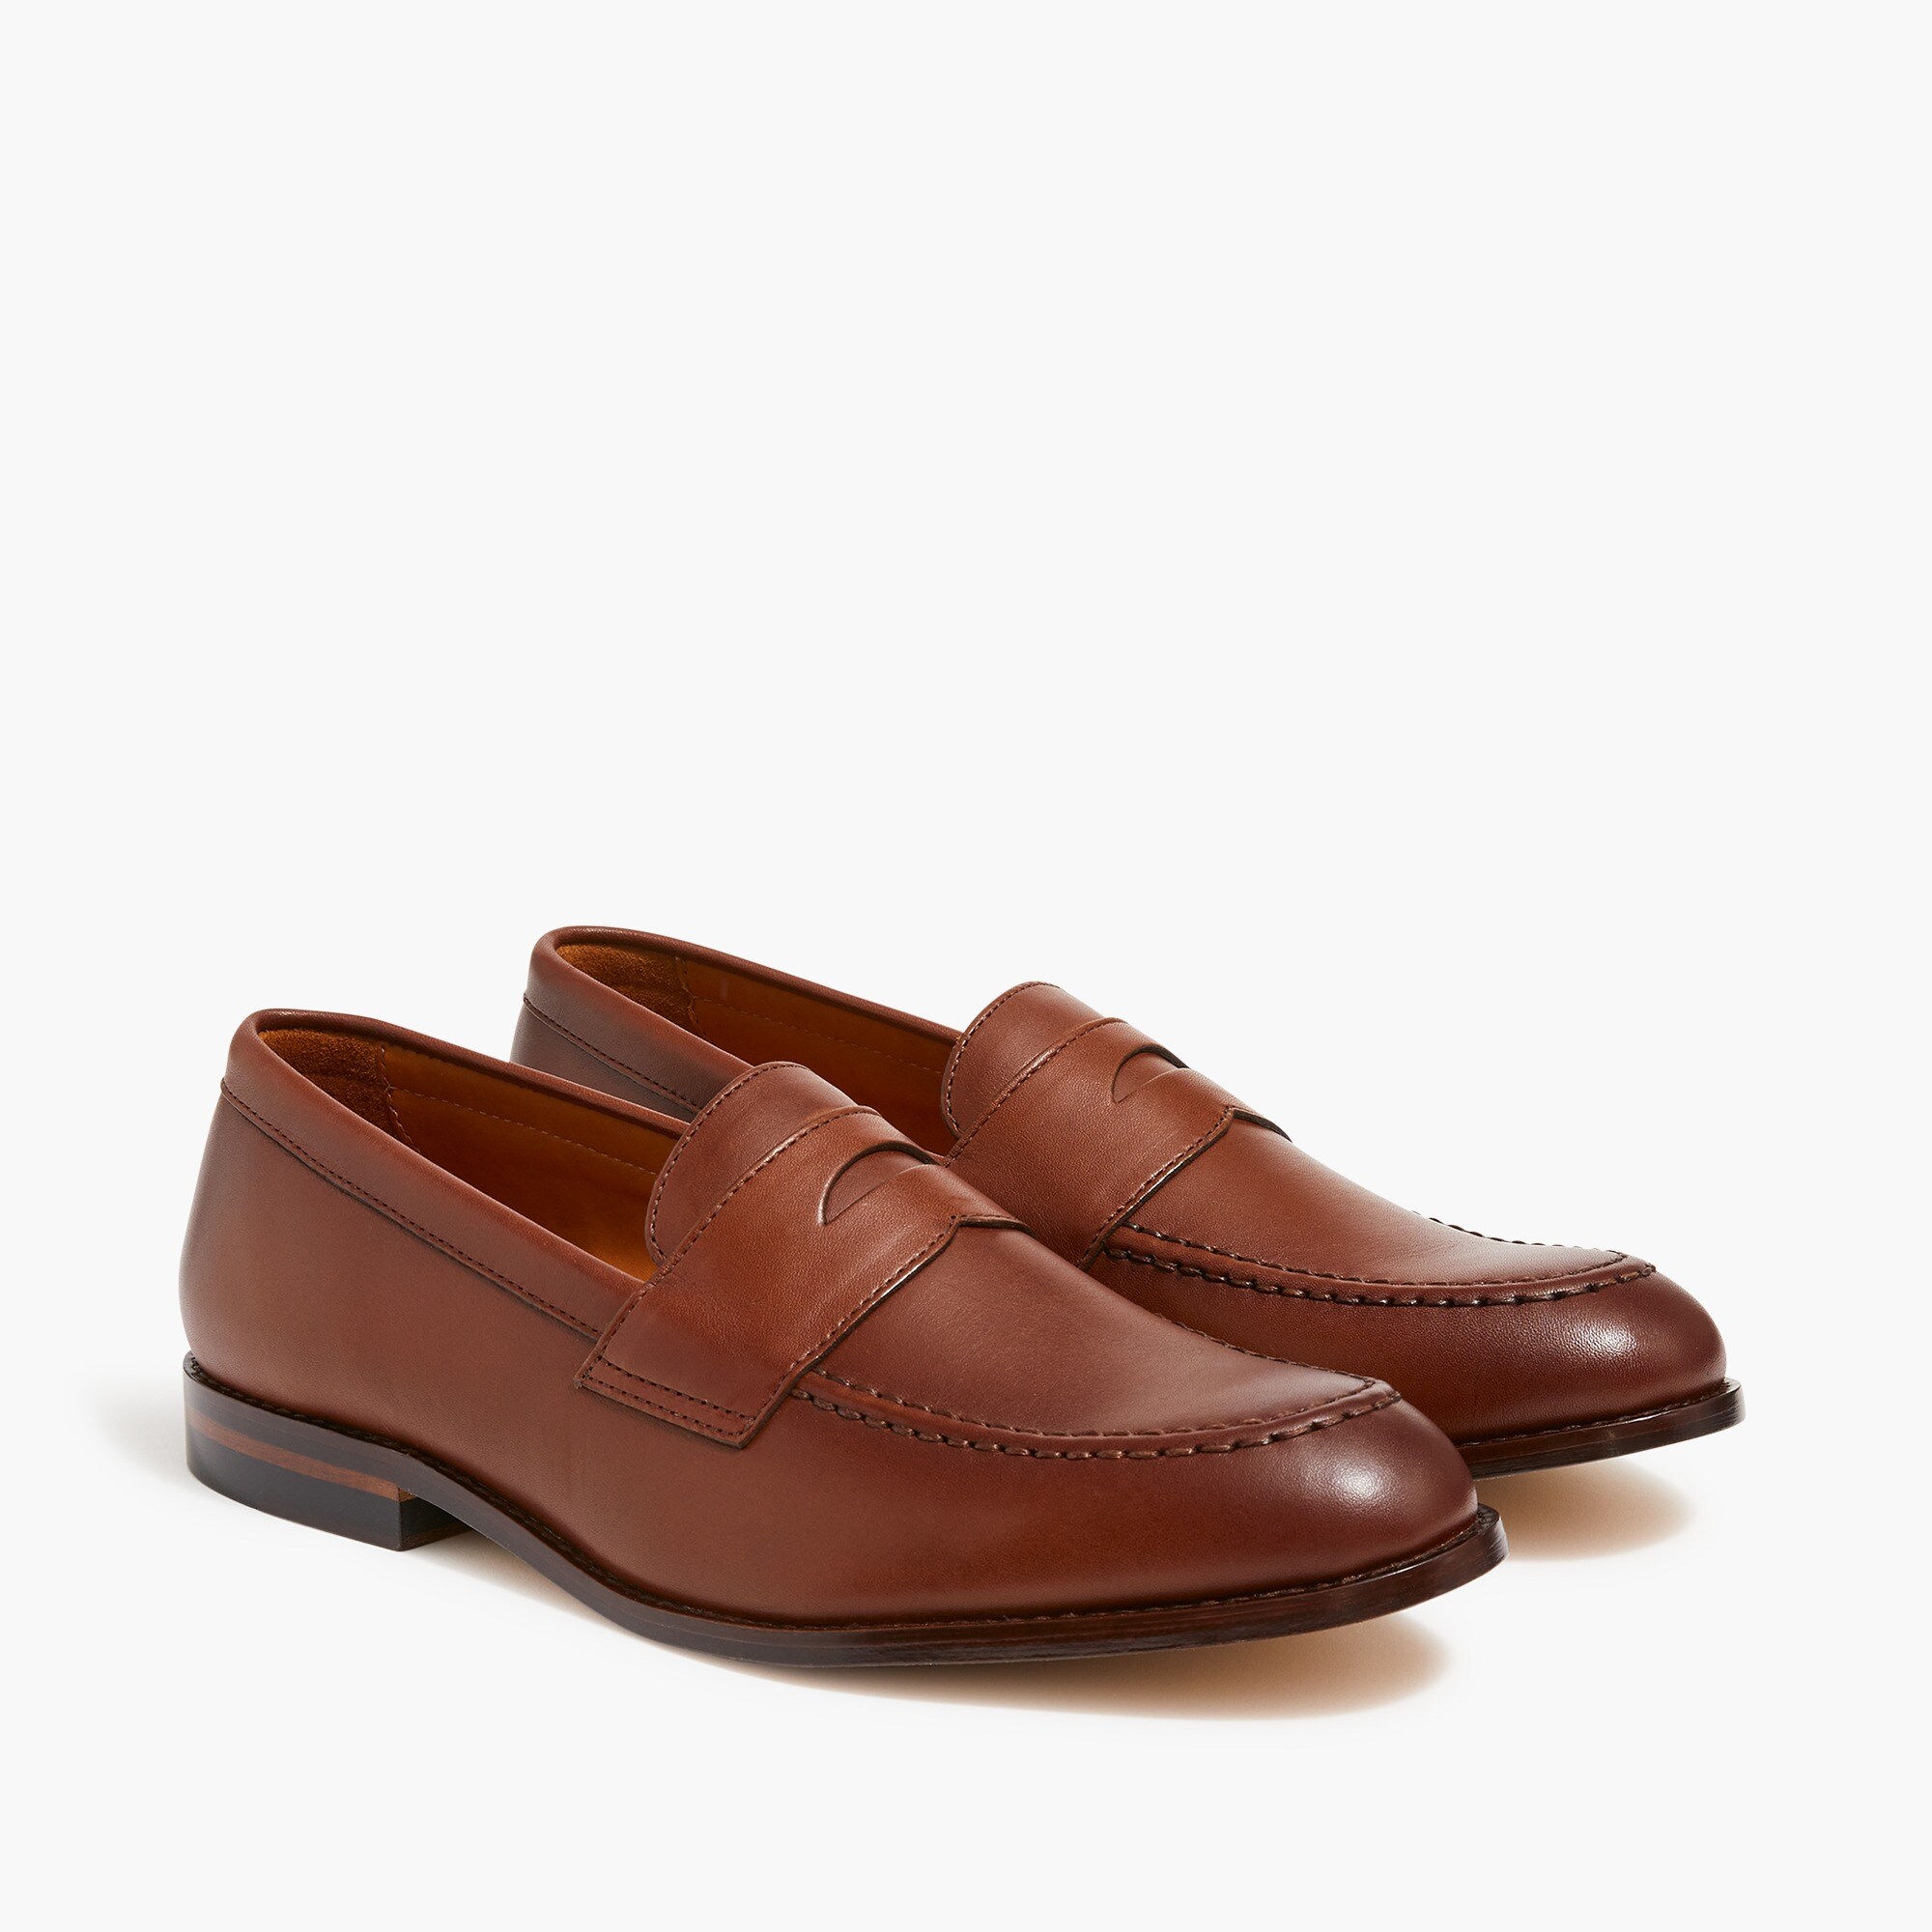 mens Classic penny loafers